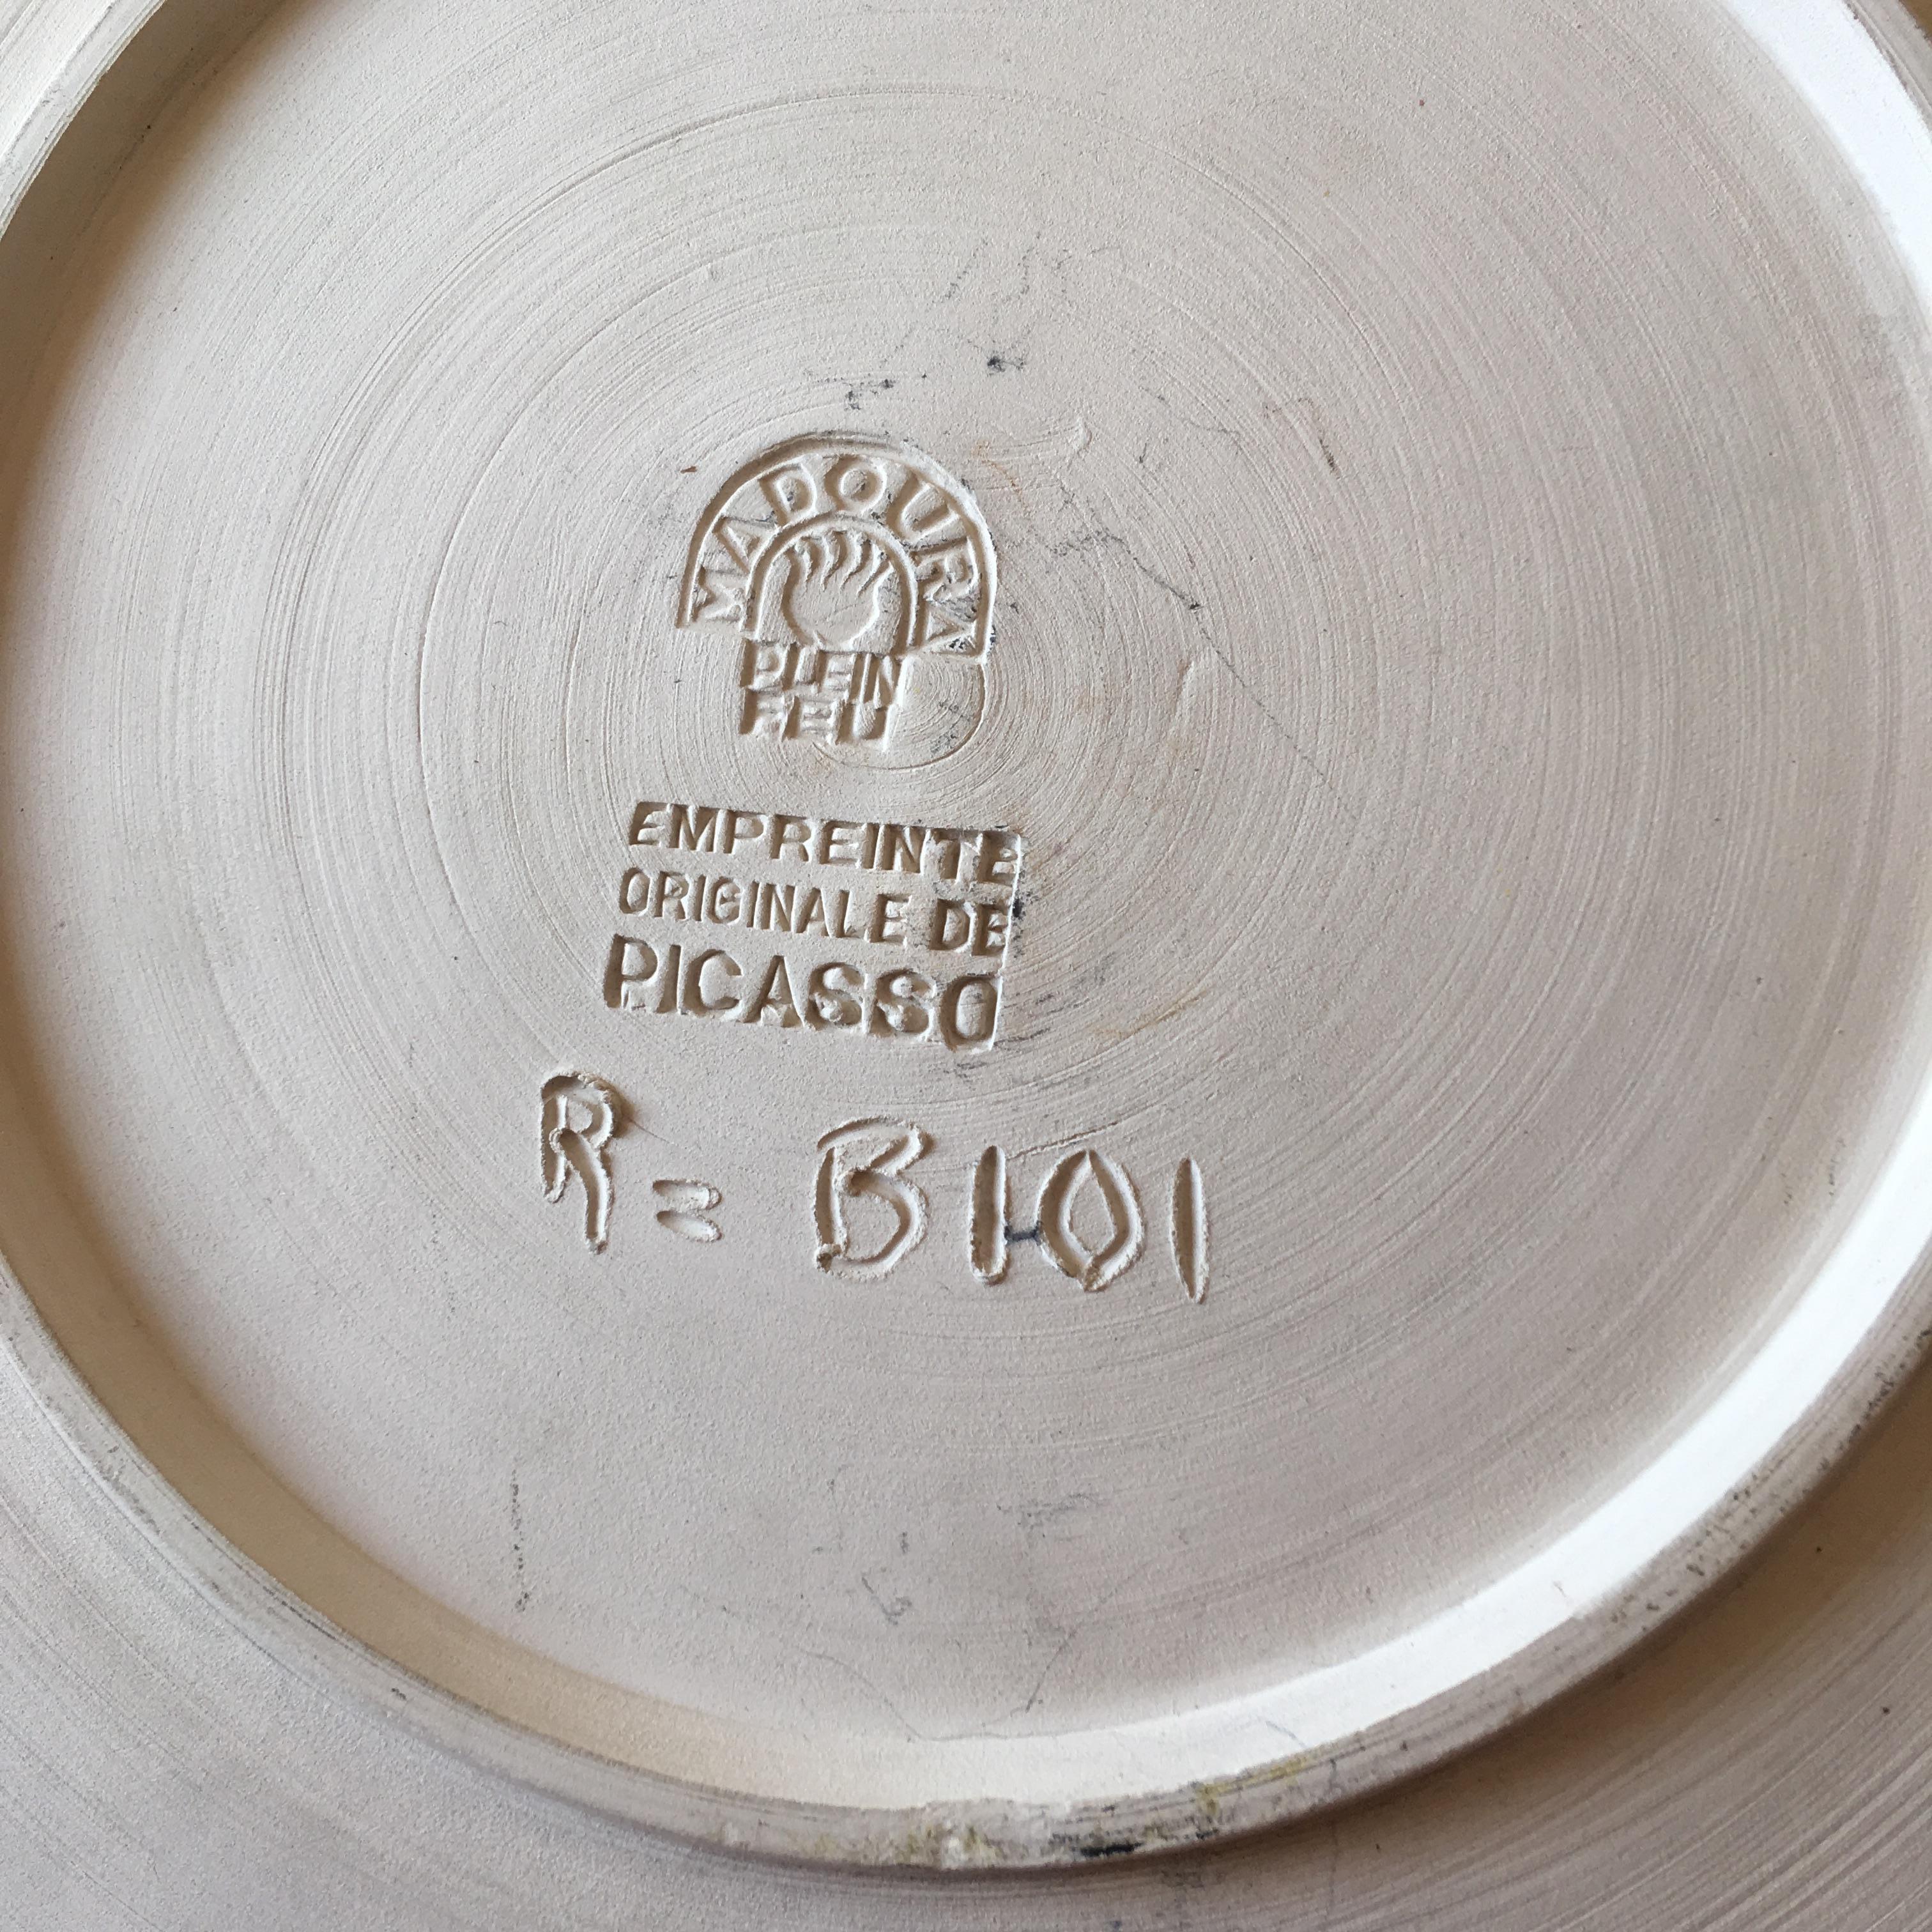 Ceramic by Pablo Picasso
In the summer of 1946, Picasso stopped in the Madoura studio, directed by Suzanne Ramié and her husband Alain Ramié. Pablo Picasso takes the earth and creates some small sculptures, asking that it be cooked to him and